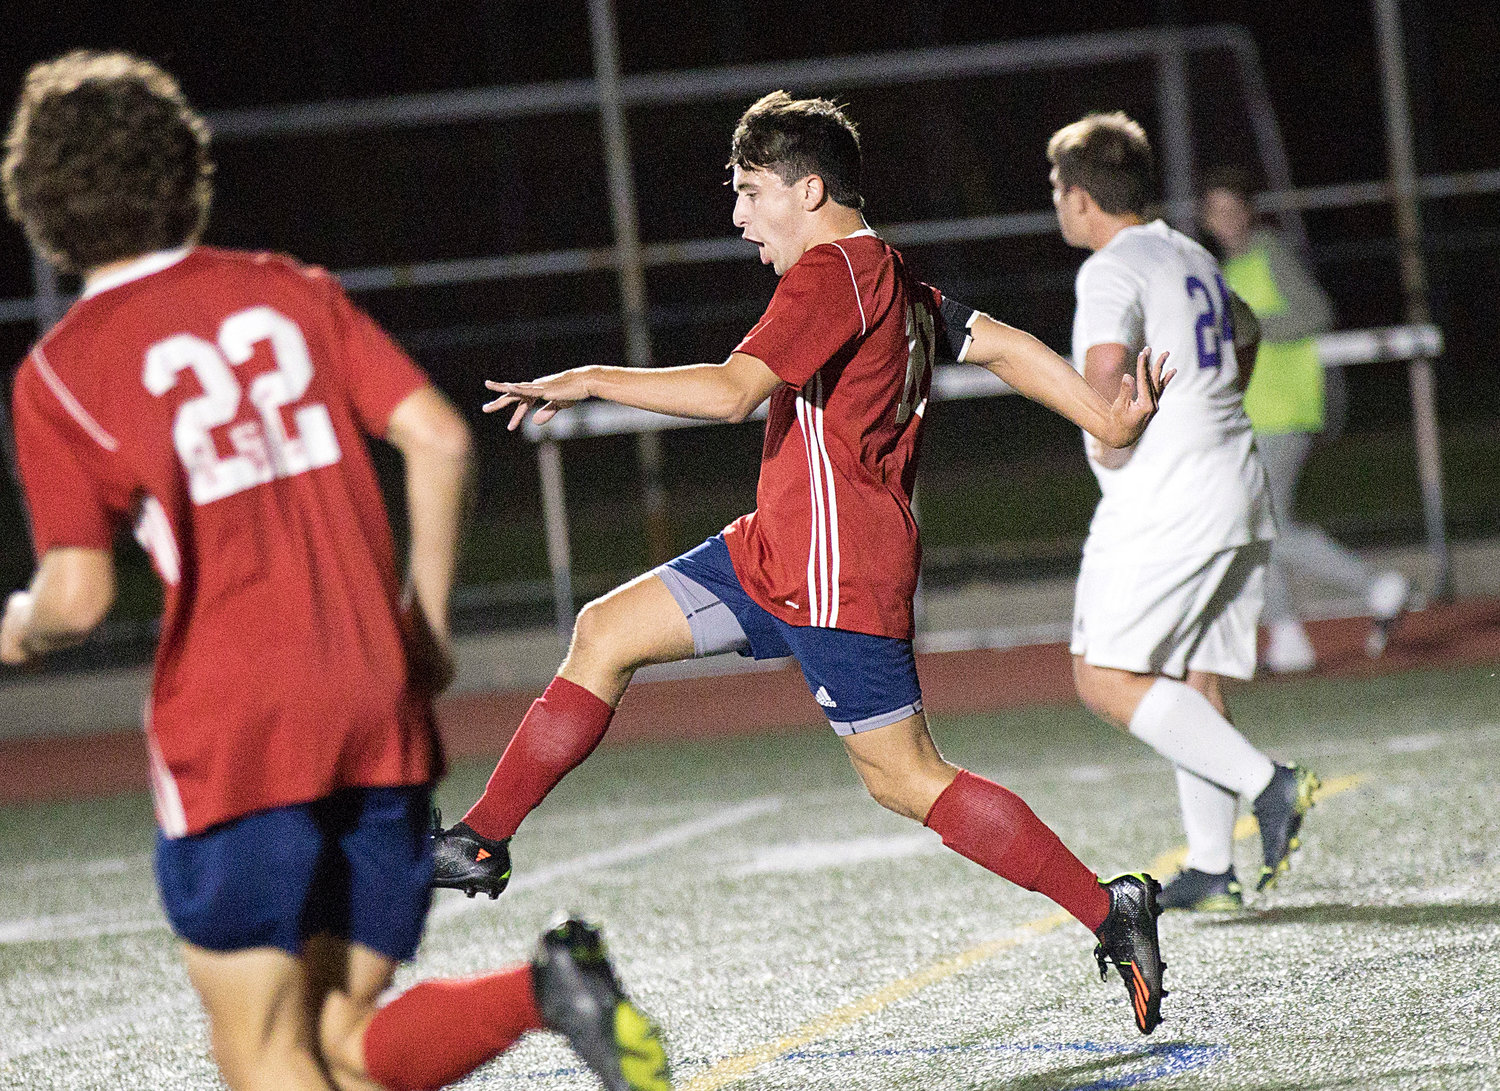 The Patriots’ Andrew Alvanas performs a victory dance after scoring against Mt. Hope in the first half of the game.